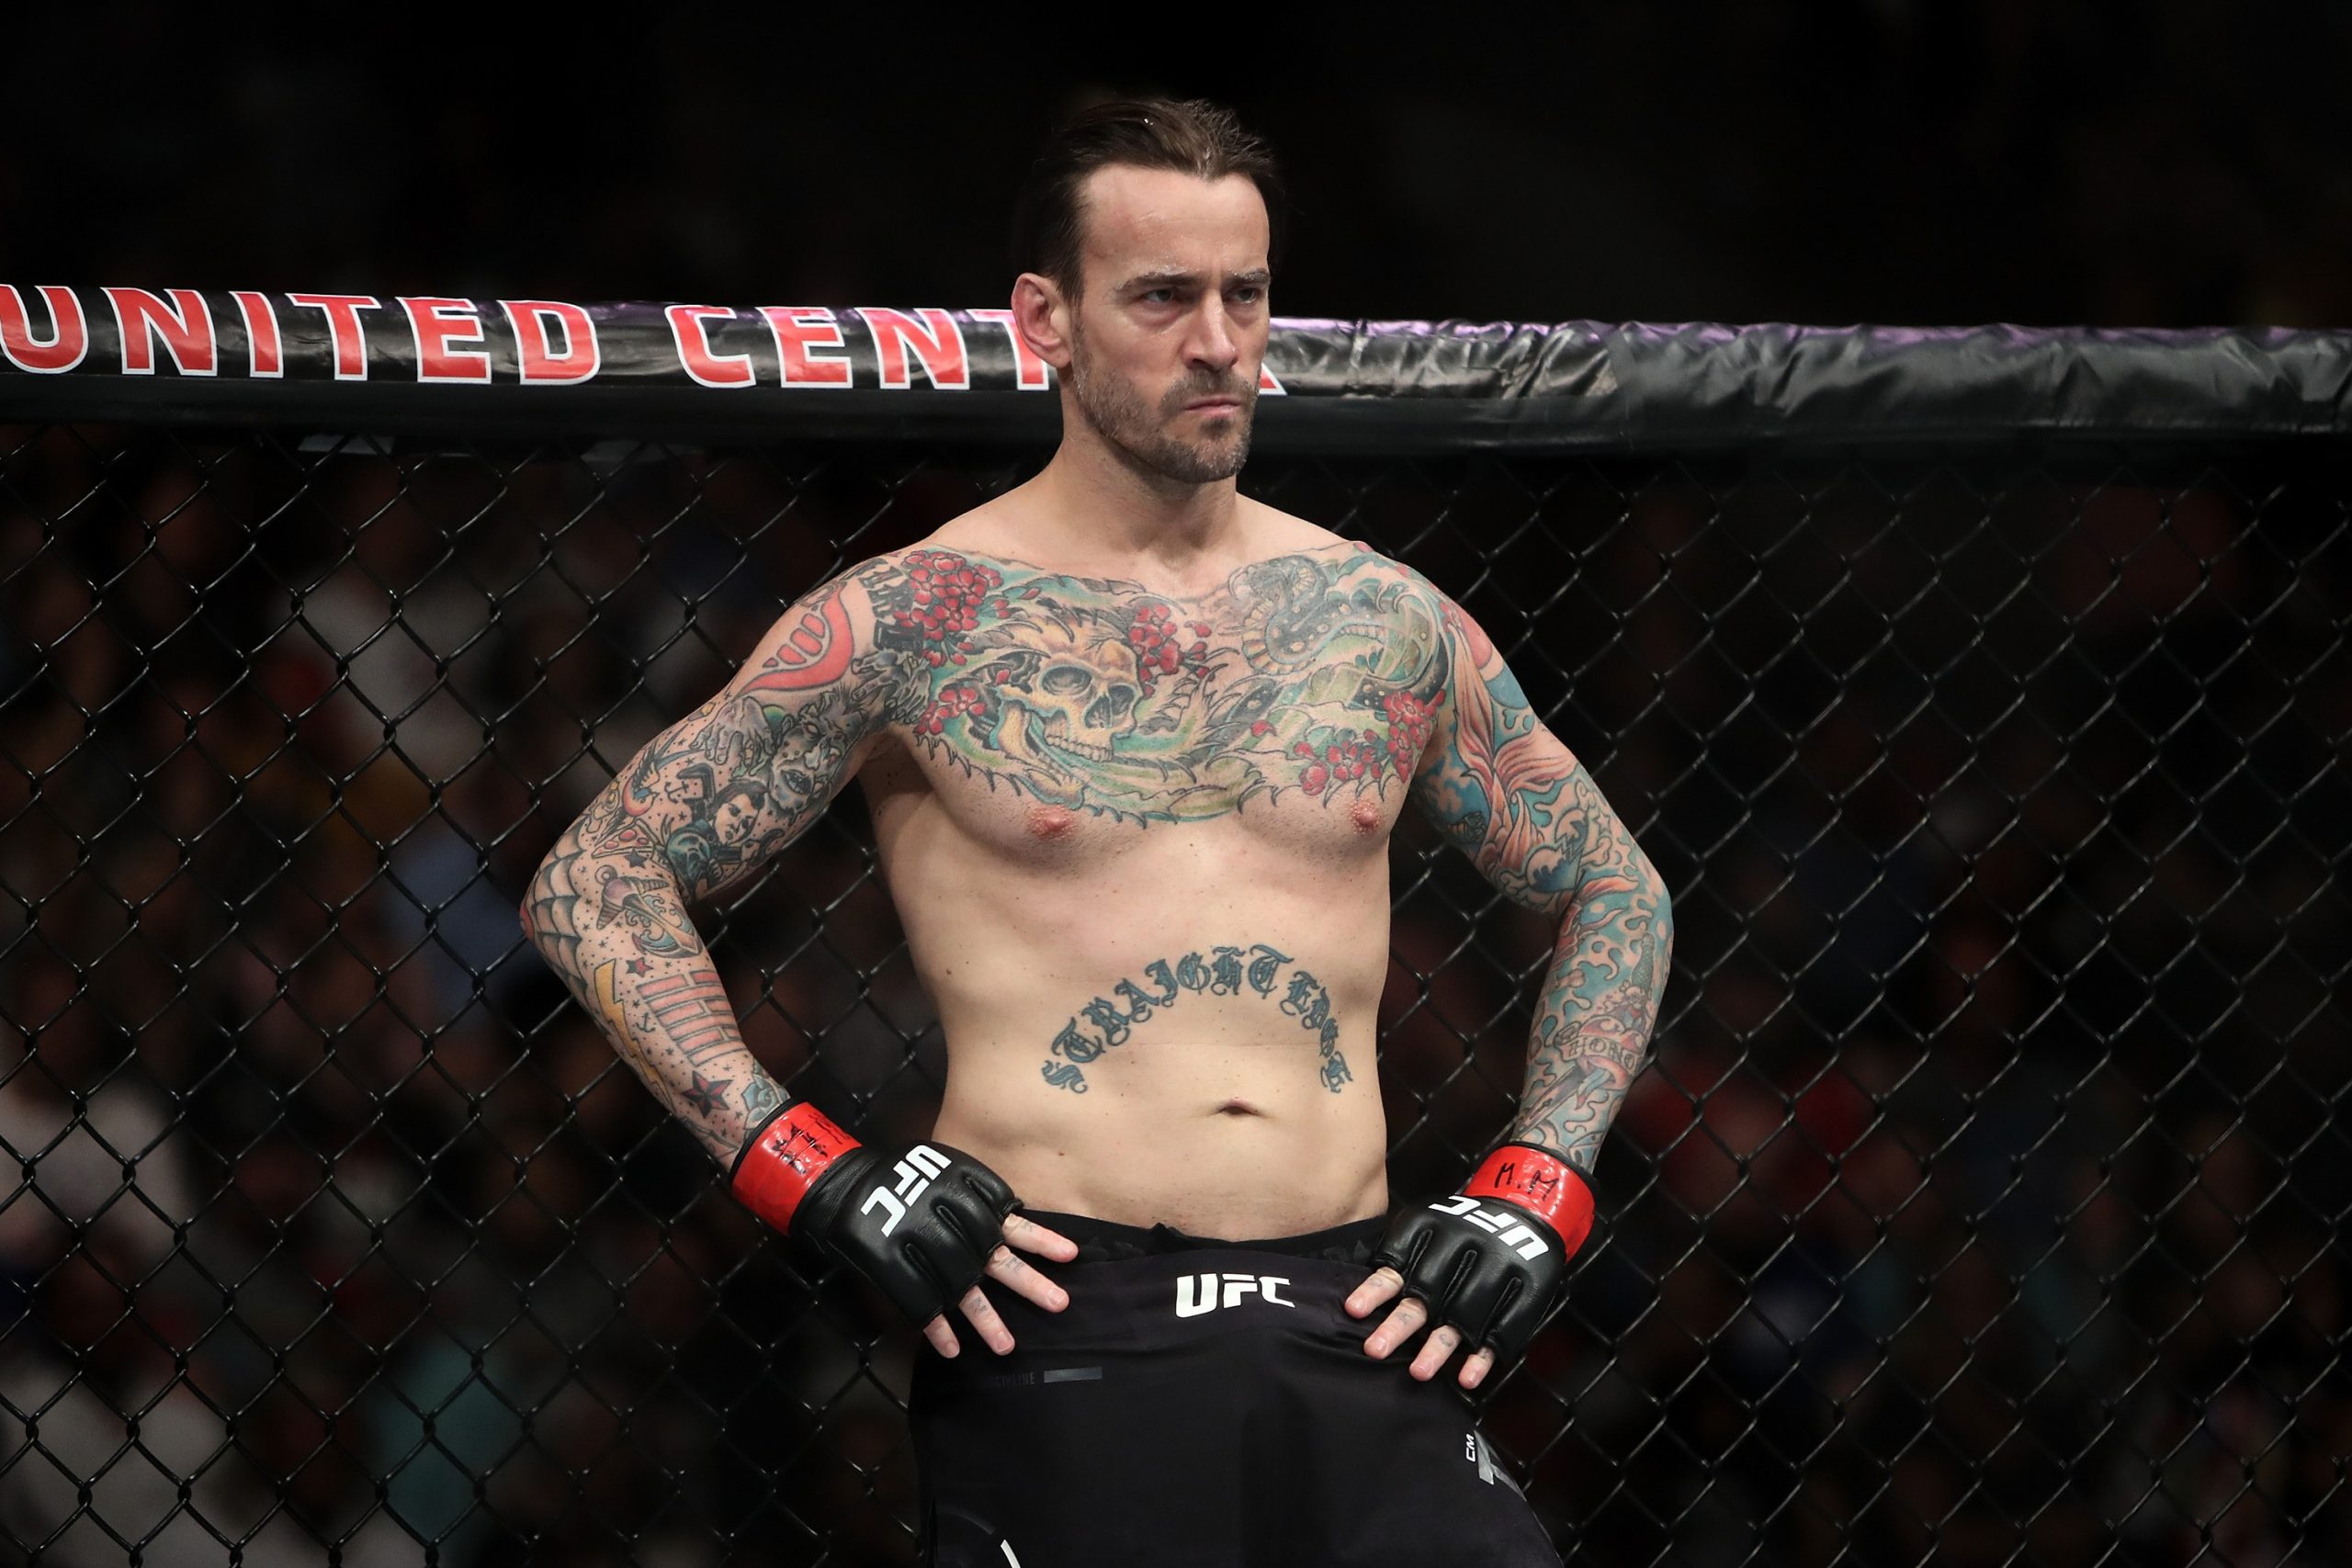 CM Punk didn't have a great MMA record